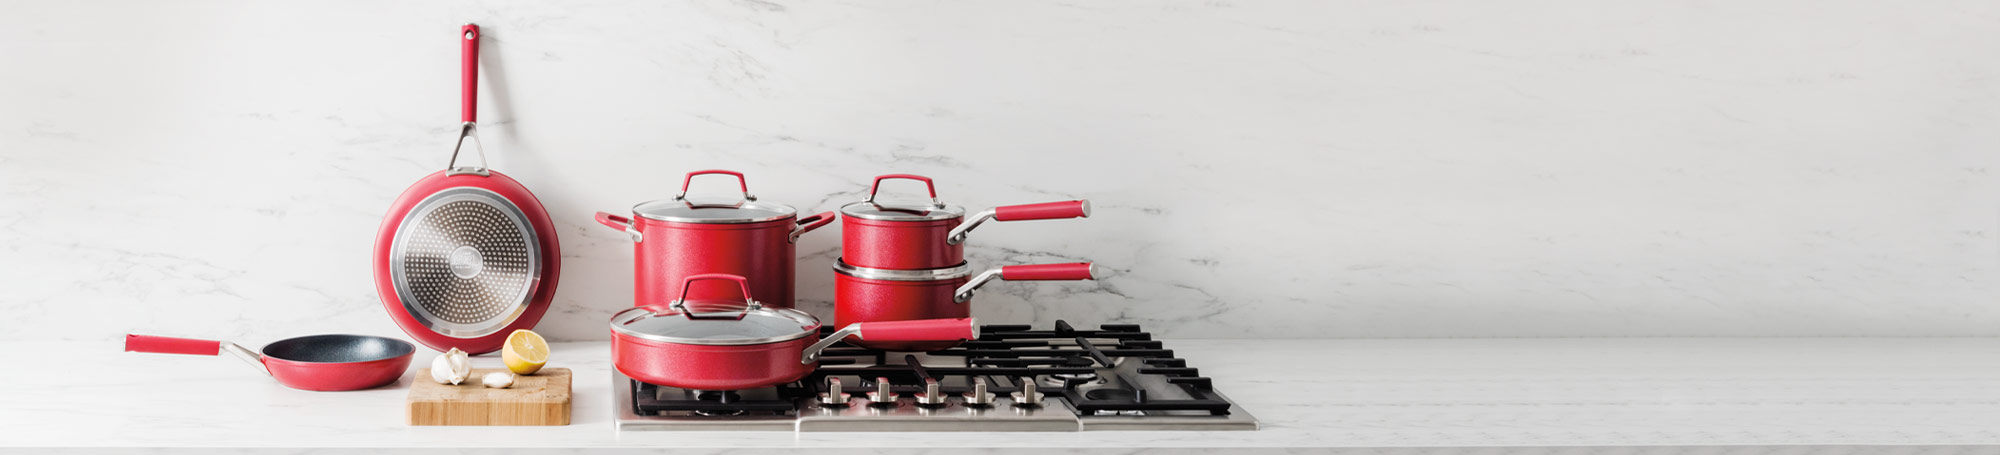 Red cookware on stovetop and countertop